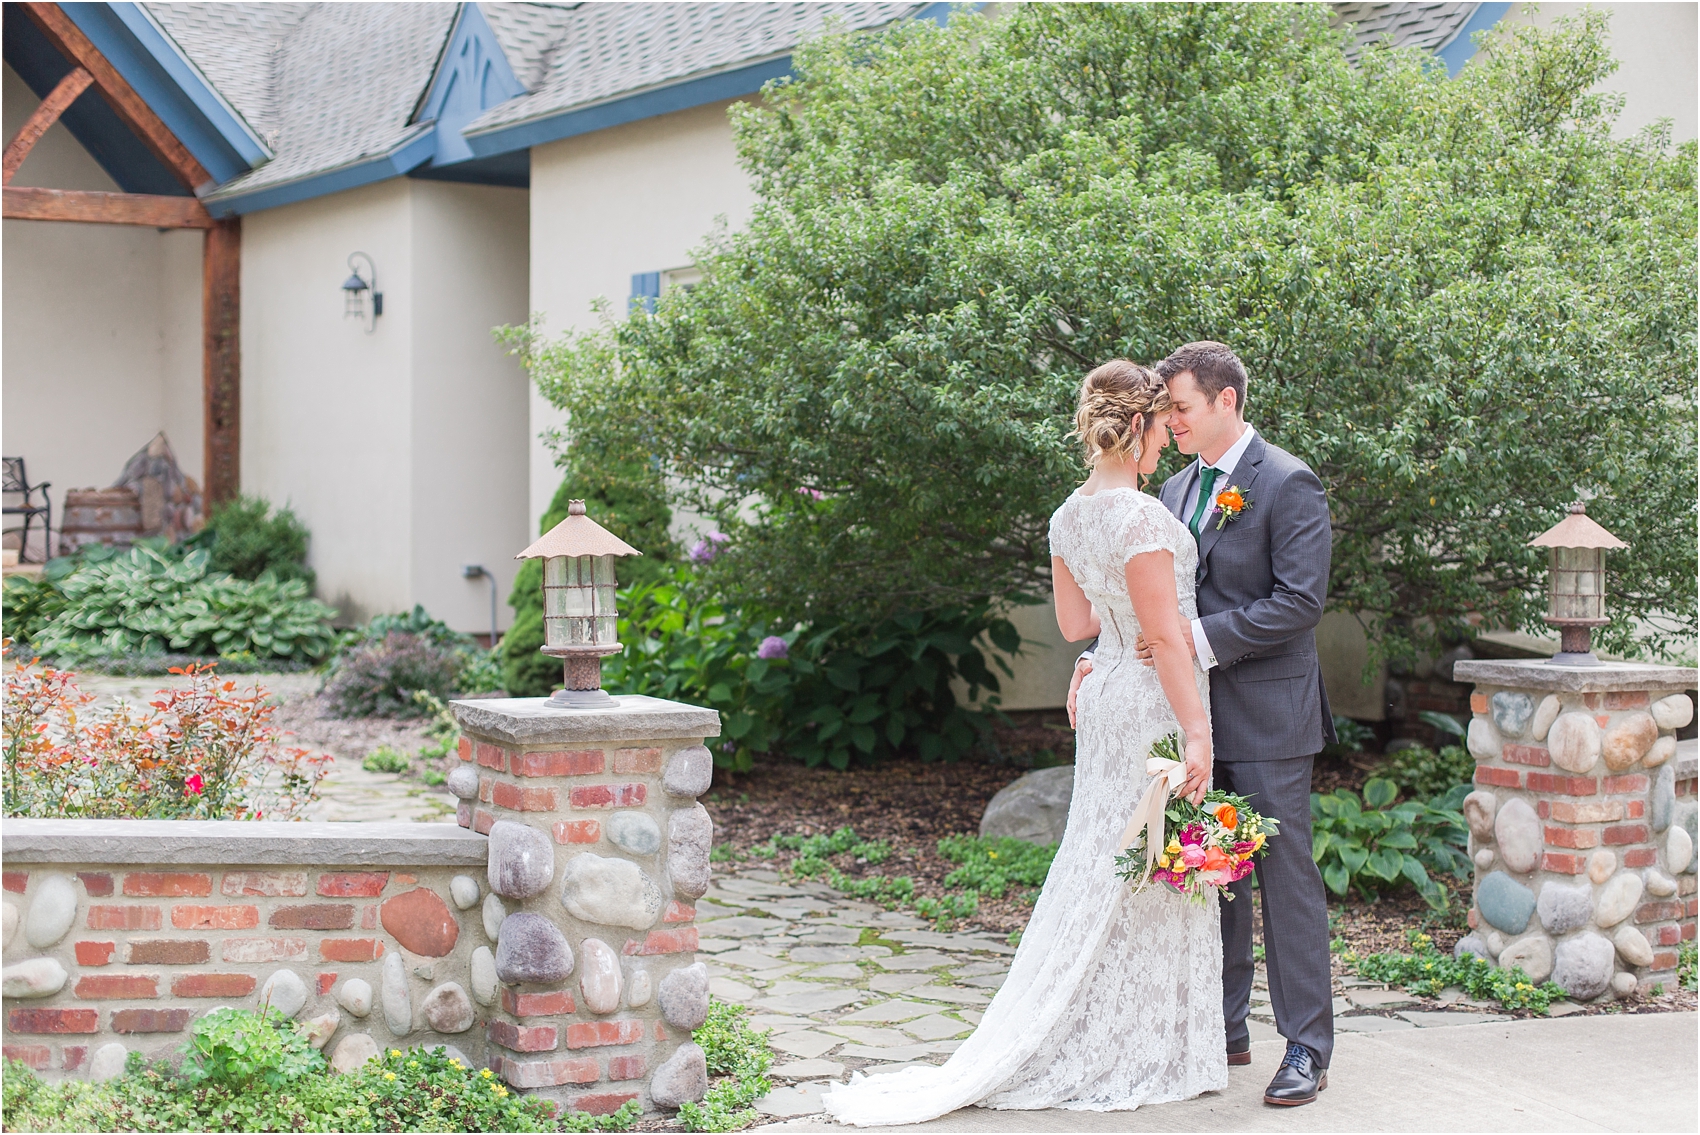 romantic-intimate-backyard-wedding-photos-at-private-estate-in-ann-arbor-mi-by-courtney-carolyn-photography_0051.jpg